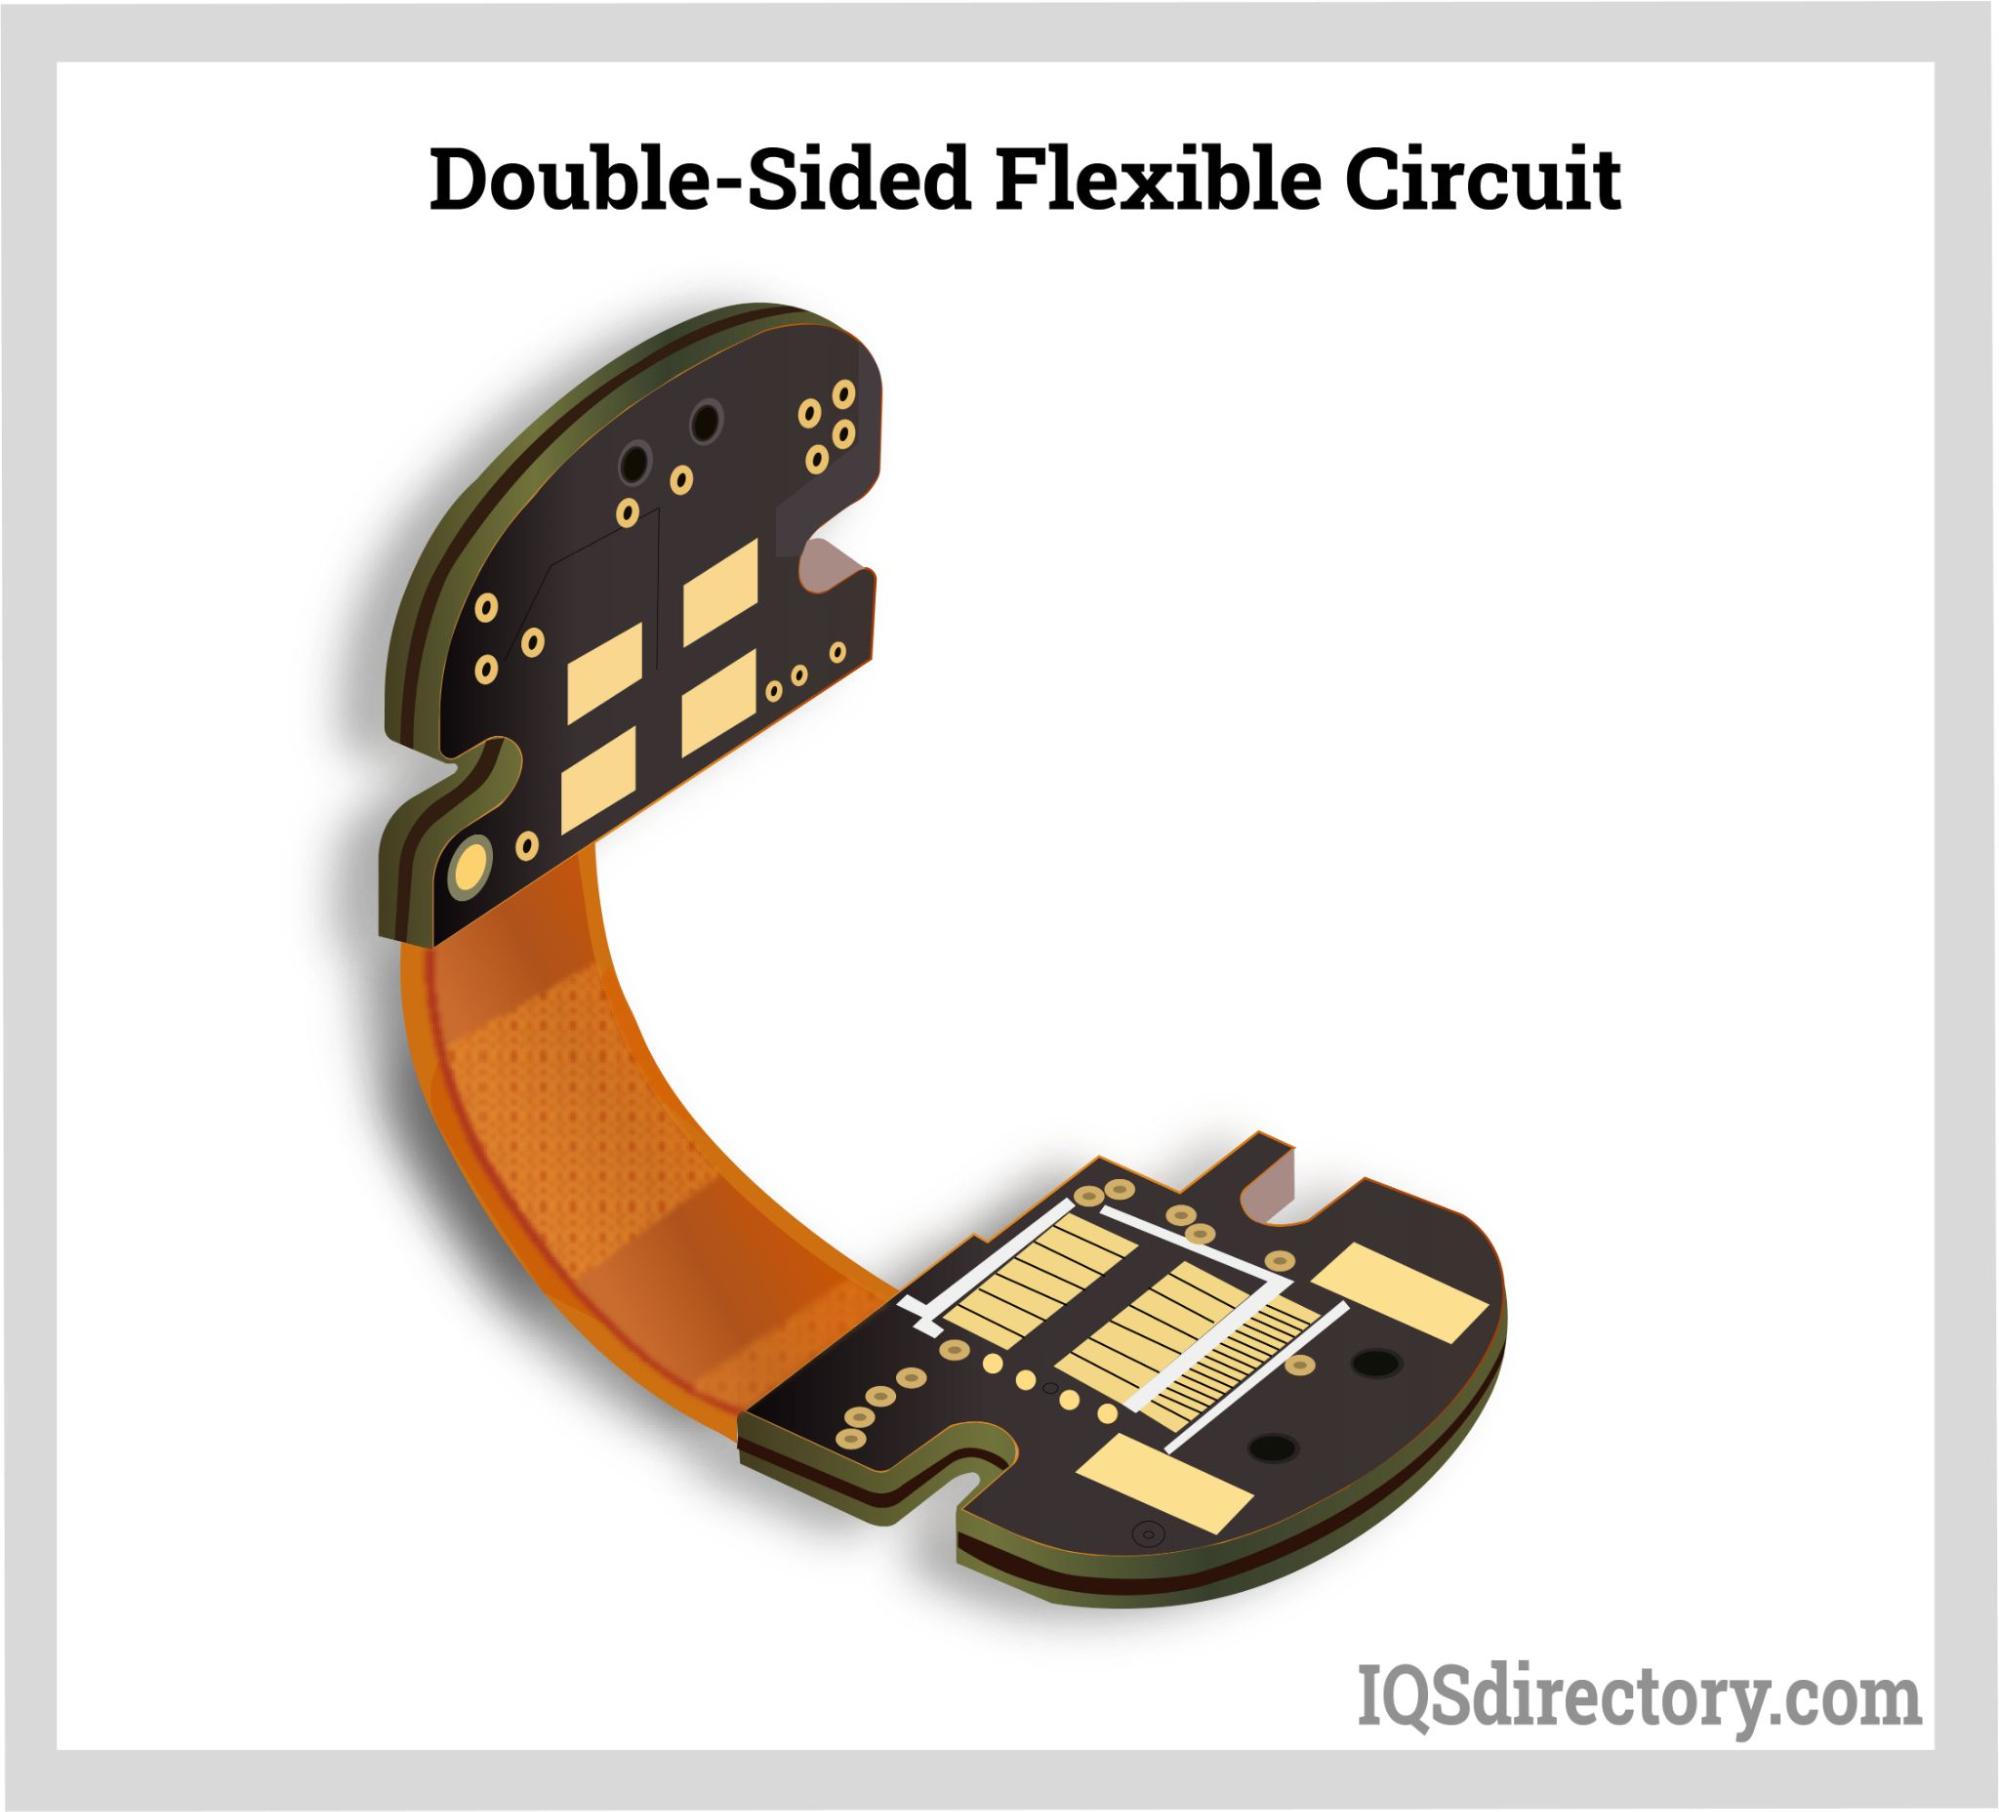 Double-Sided Flexible Circuit